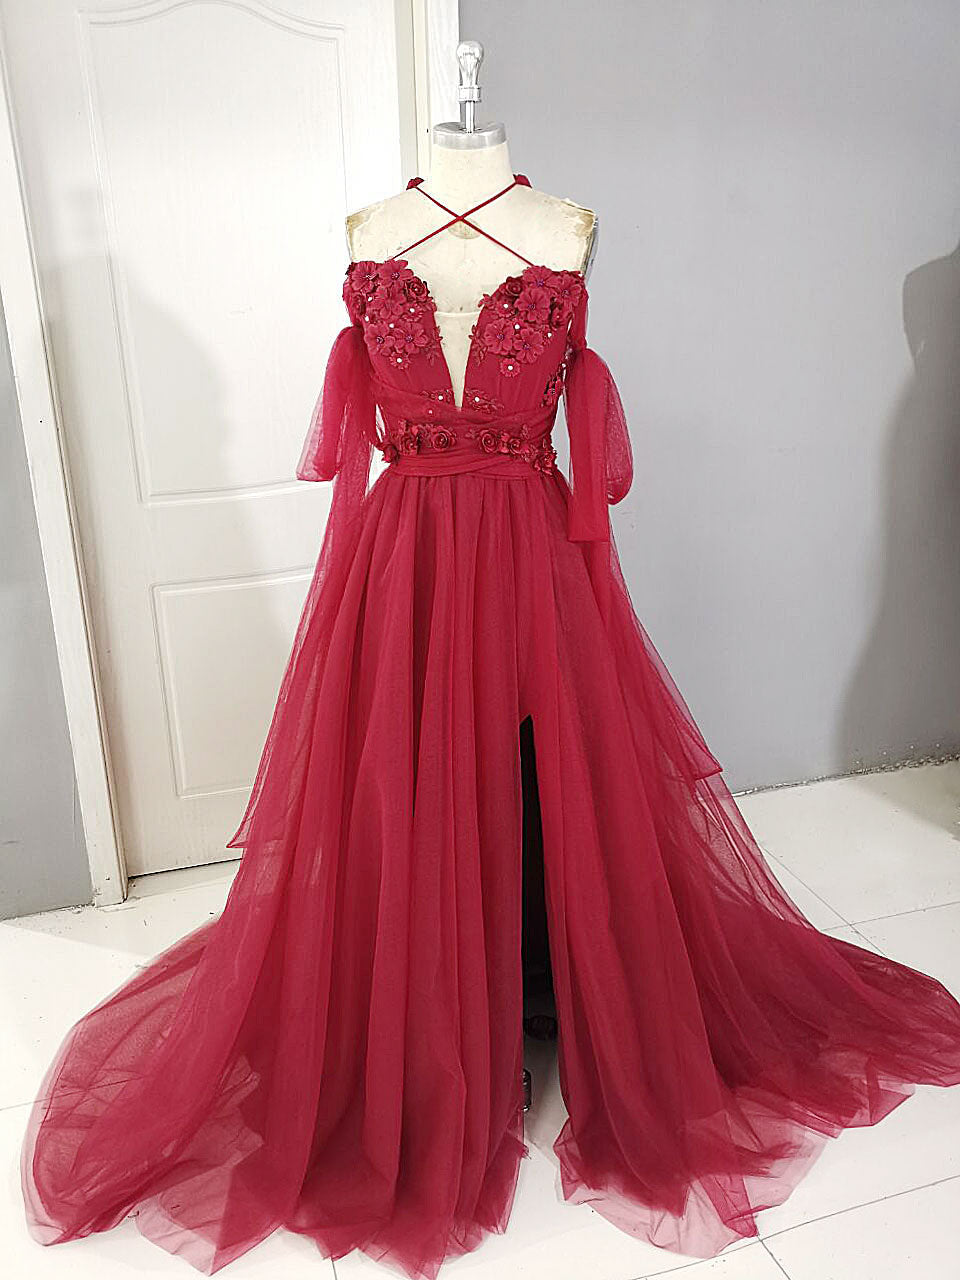 Dark Red Tulle Lace Long Corset Prom Dress, Red Tulle Lace Evening Dress outfit, Princess Prom Dress